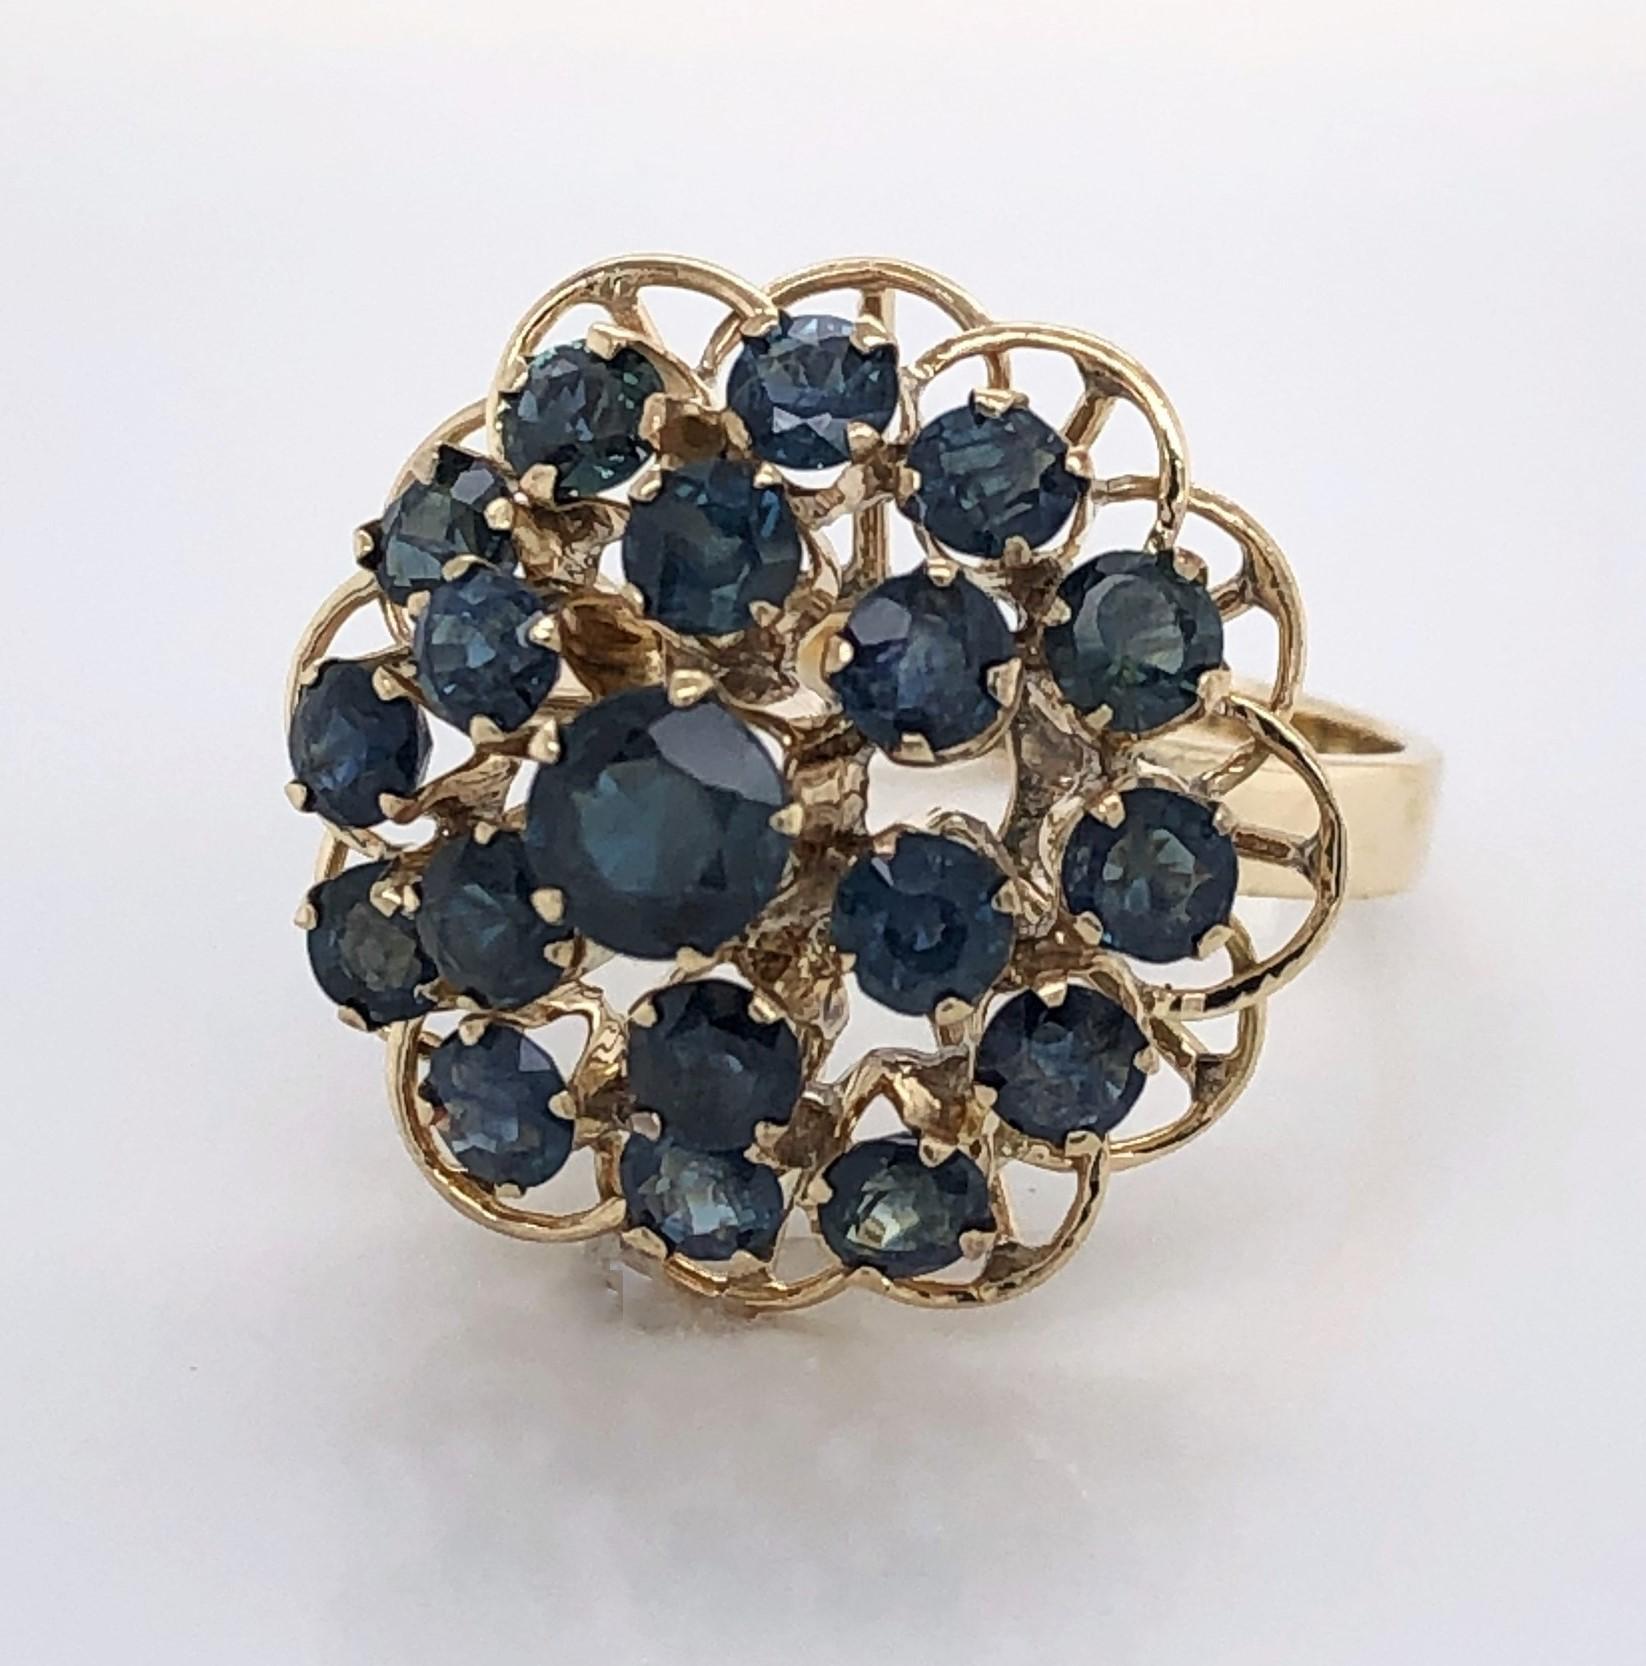 A pyramid of indigo blue sapphires adorn the head of this stunning ten carat 10K  yellow gold cocktail ring. The color and  light, airy placement of the individual prong set stones make this the perfect piece for today's more 